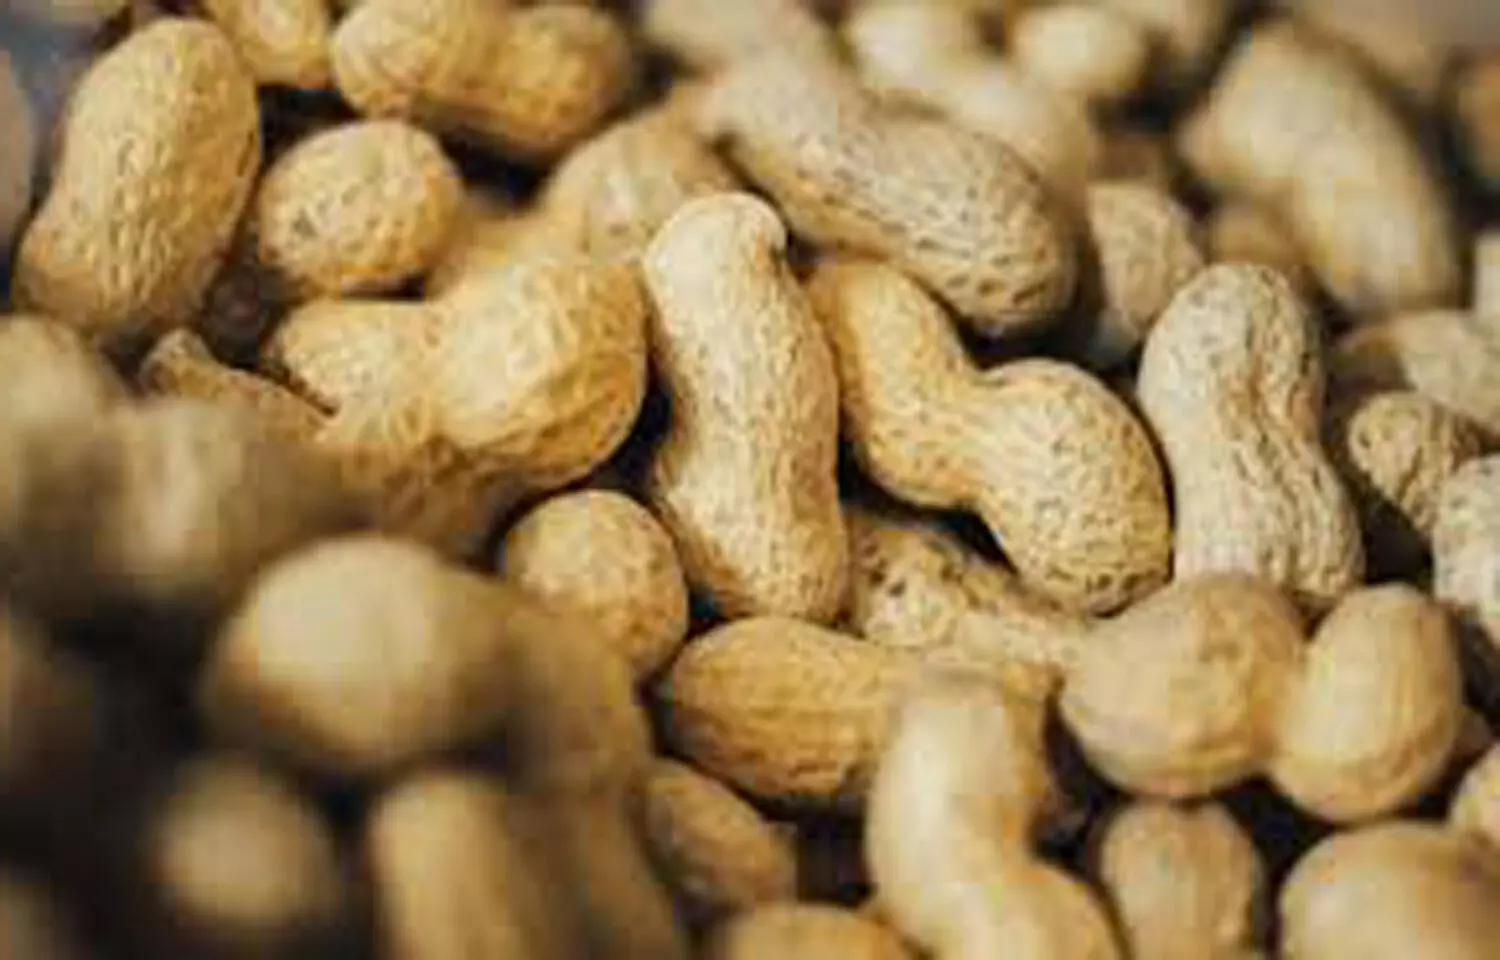 Oral immunotherapy induces remission of peanut allergy in some young children: Lancet